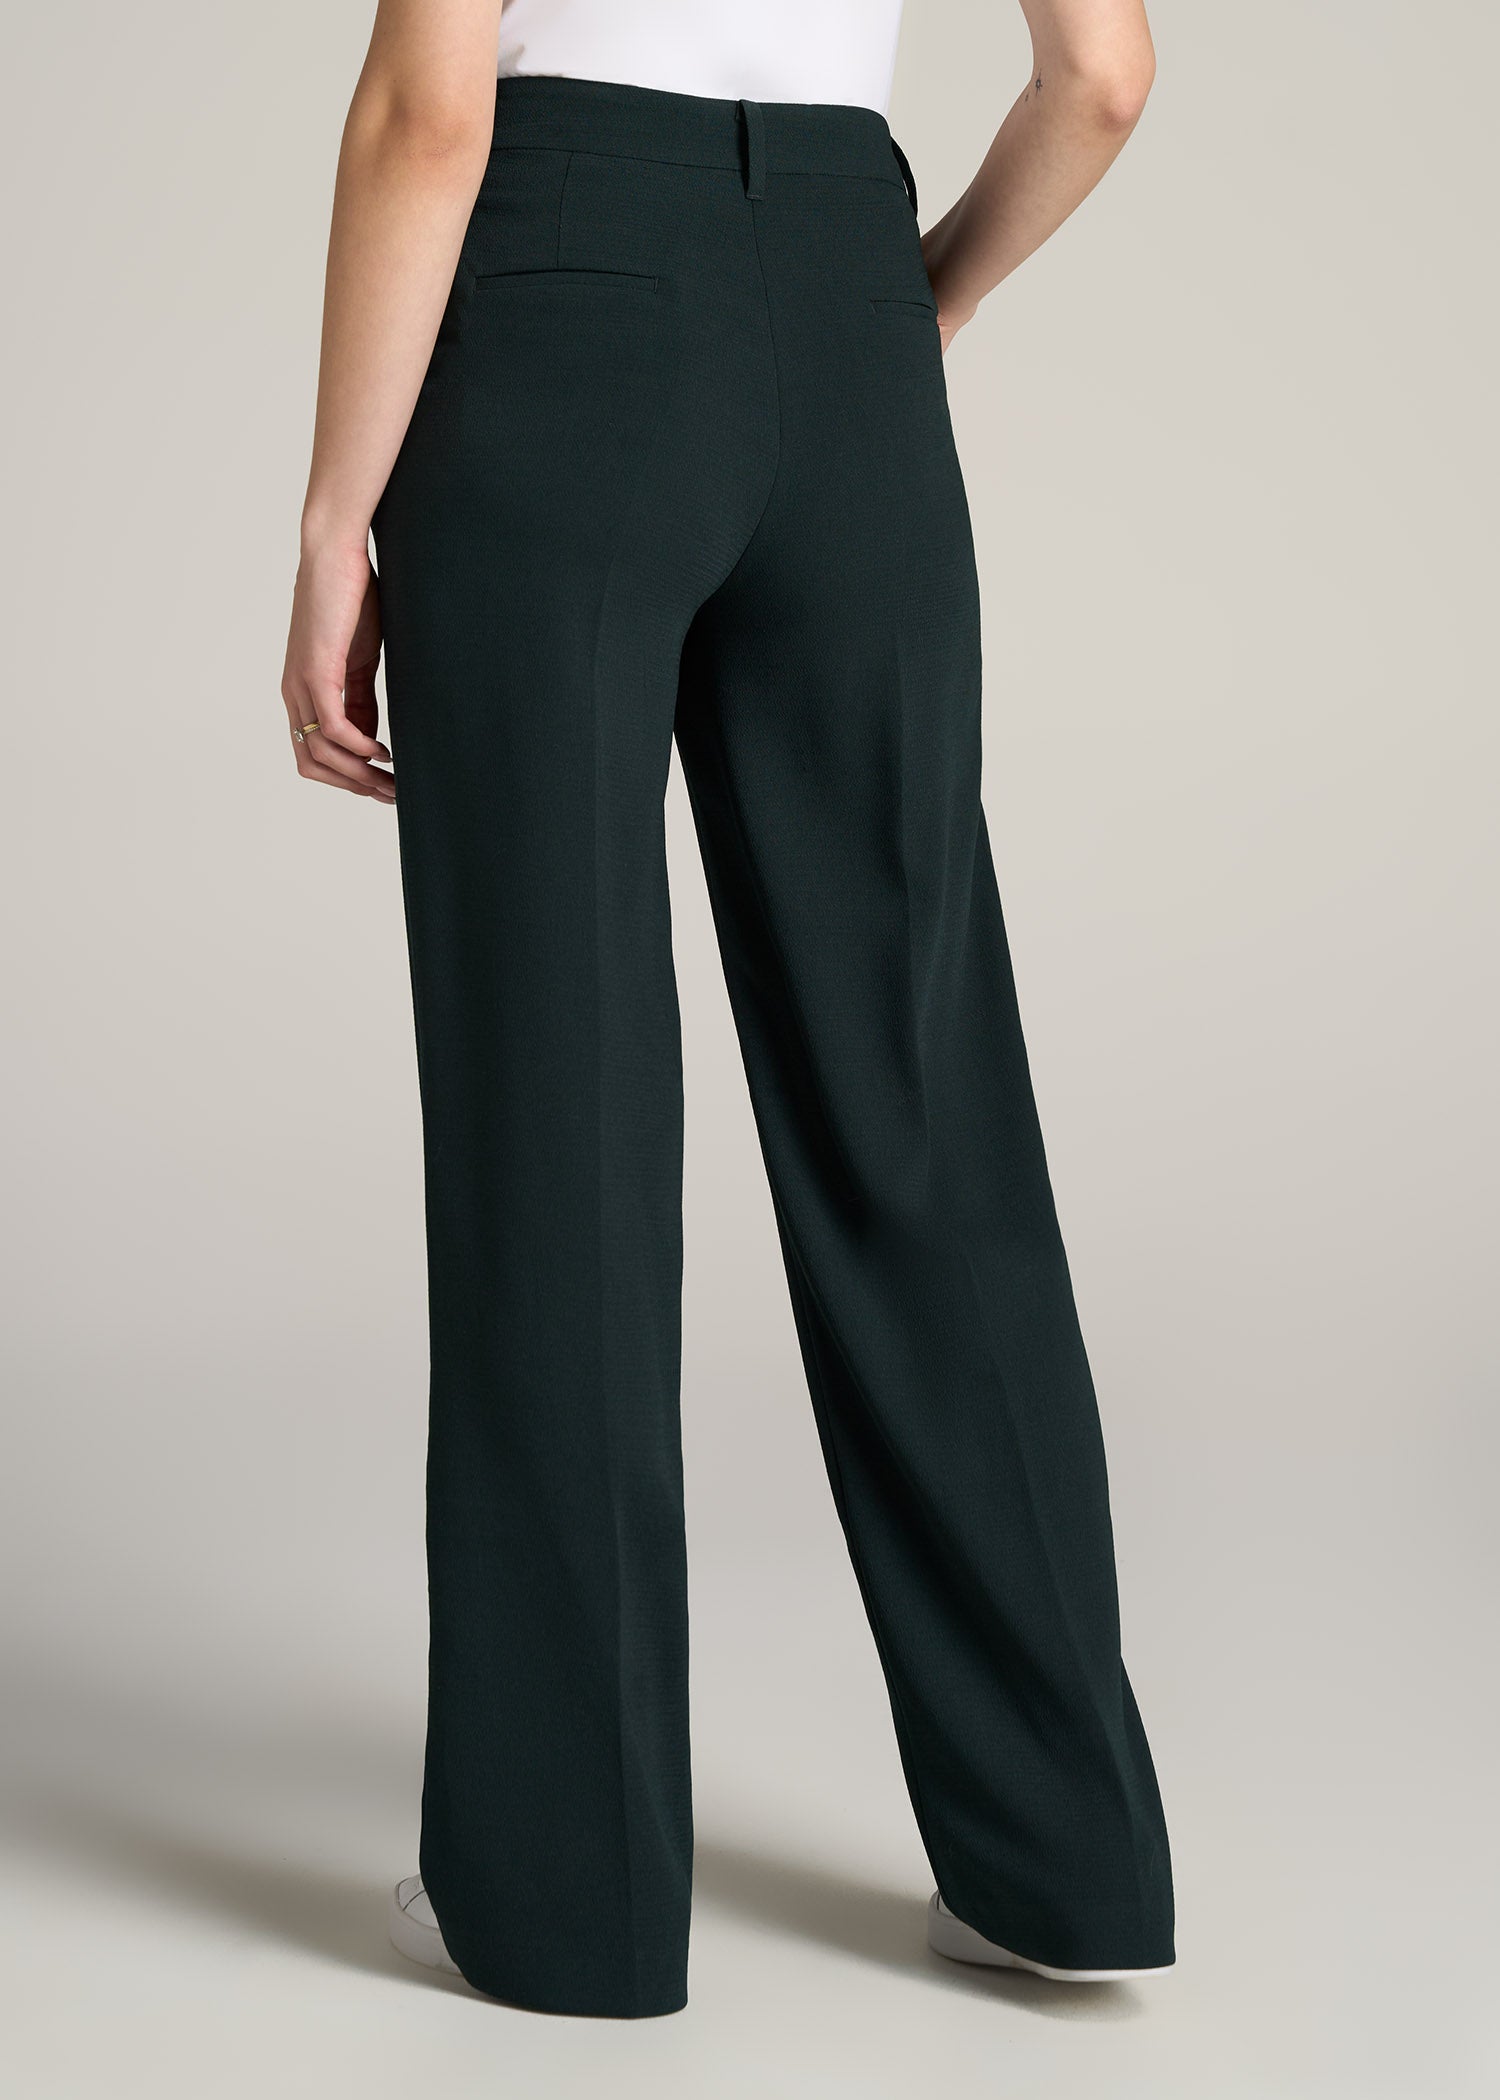 Bar Iii Women's High-Rise Textured Crepe Wide-Leg Pants, Created for Macy's  | Plaza Las Americas